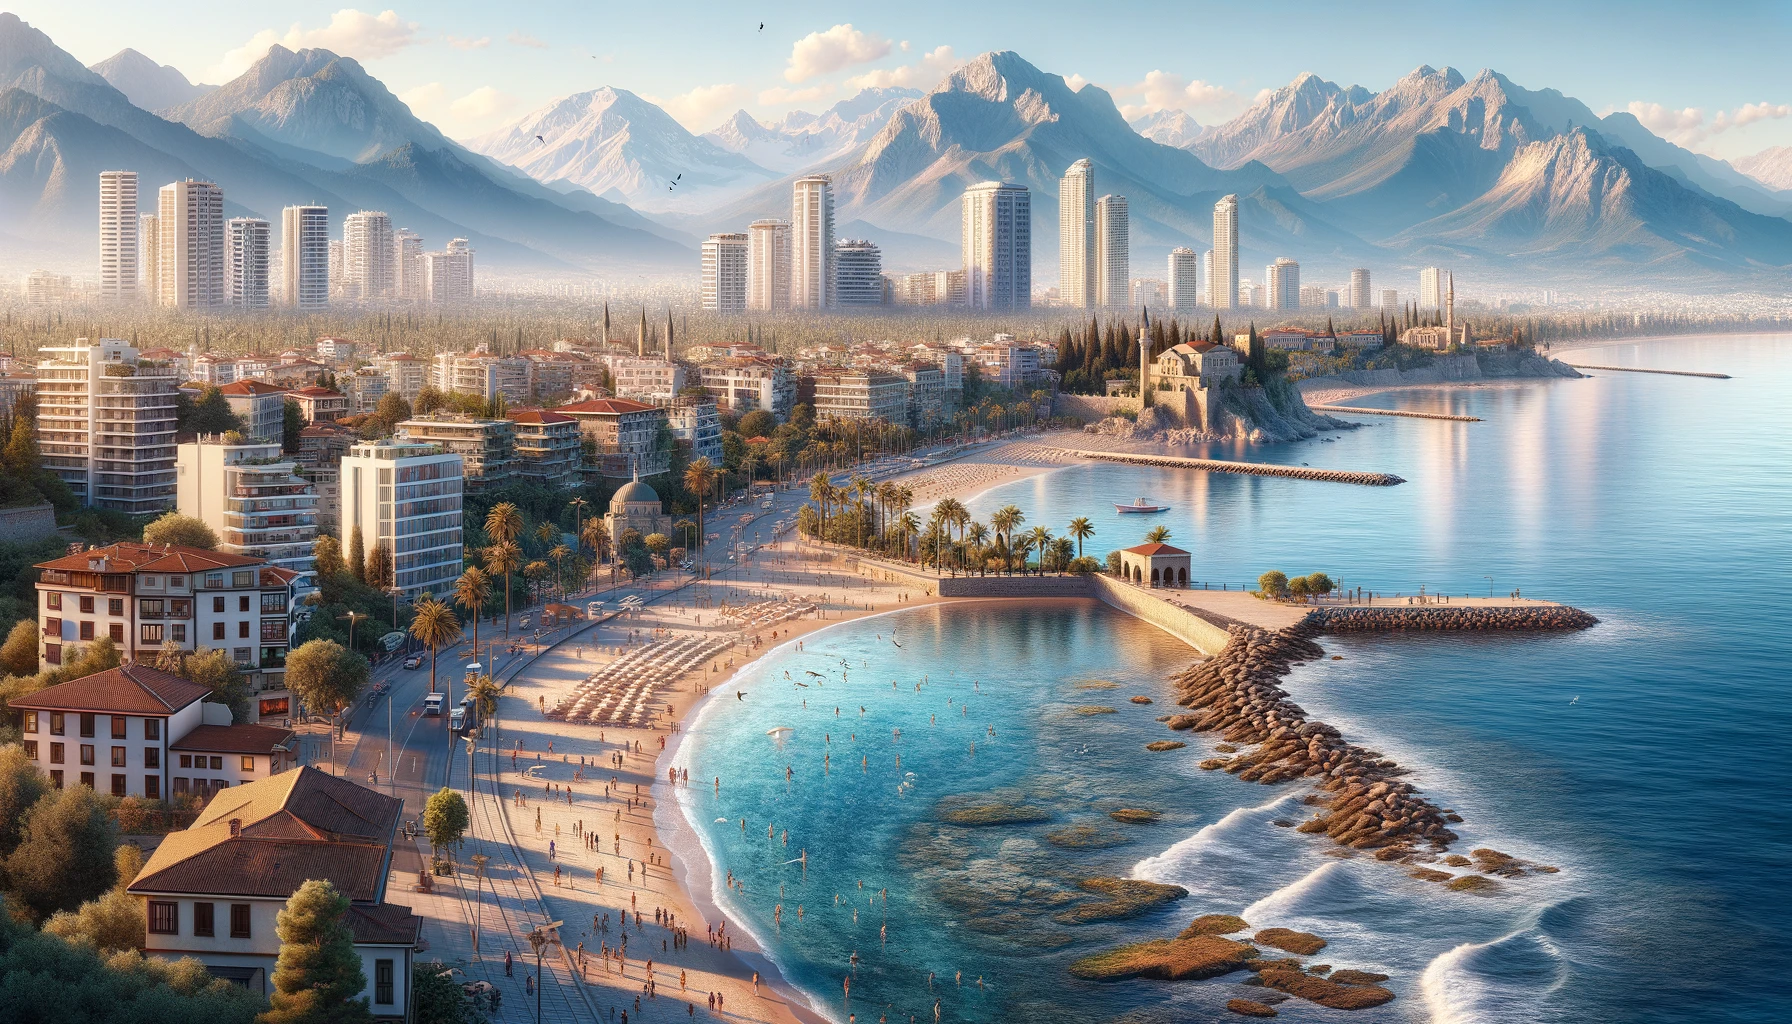 <p>Antalya is a stunning coastal city in Turkey known for its beautiful beaches and historic sites. The cost of living is low, and the city offers a relaxed lifestyle with a warm climate. It’s a perfect destination for those who love the Mediterranean lifestyle without the high costs.</p>